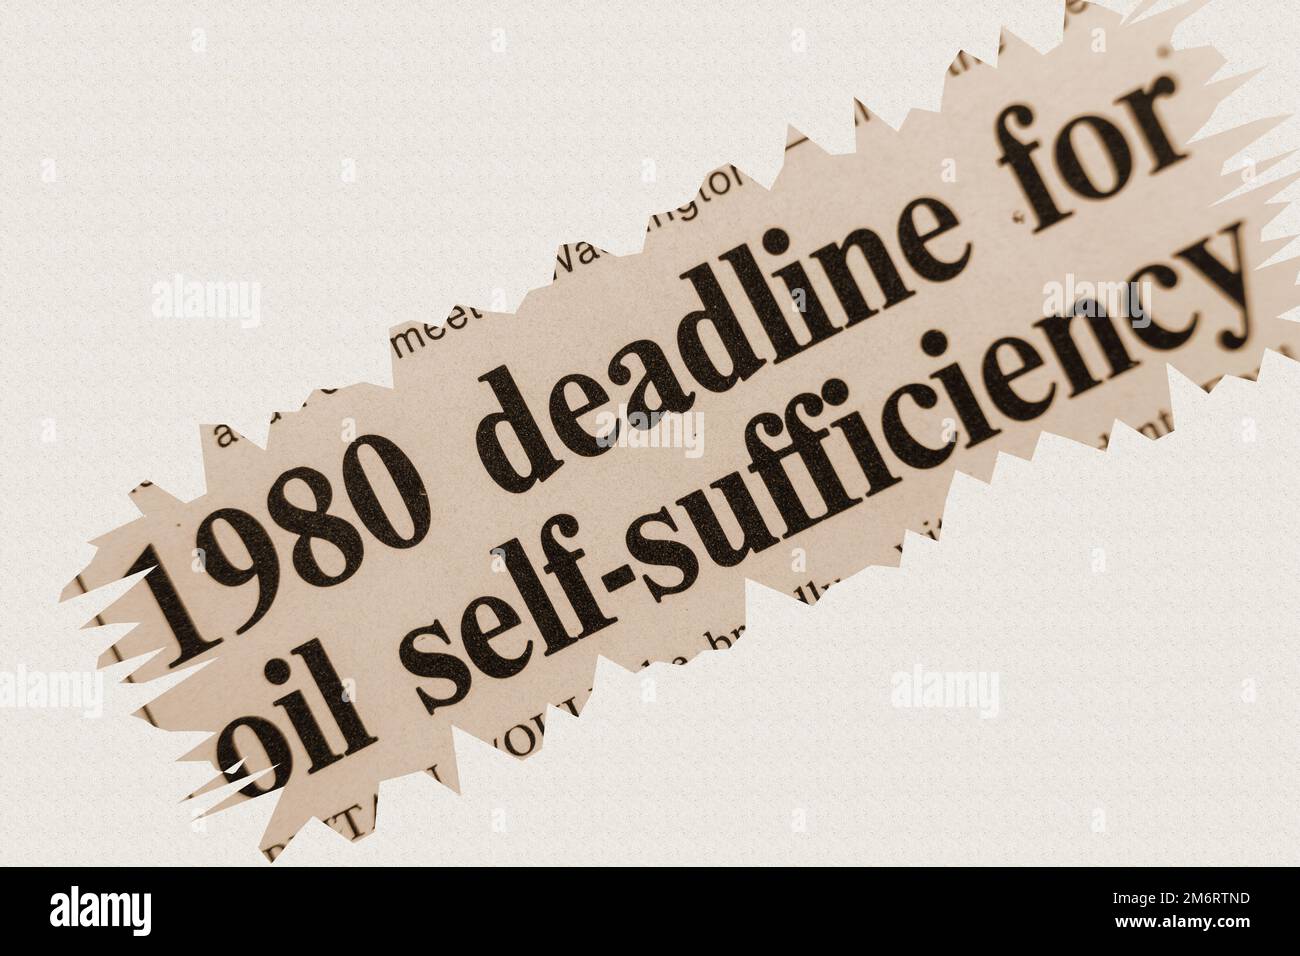 news story from 1975 newspaper headline article title - 1980 deadline for oil self-sufficiency in sepia Stock Photo